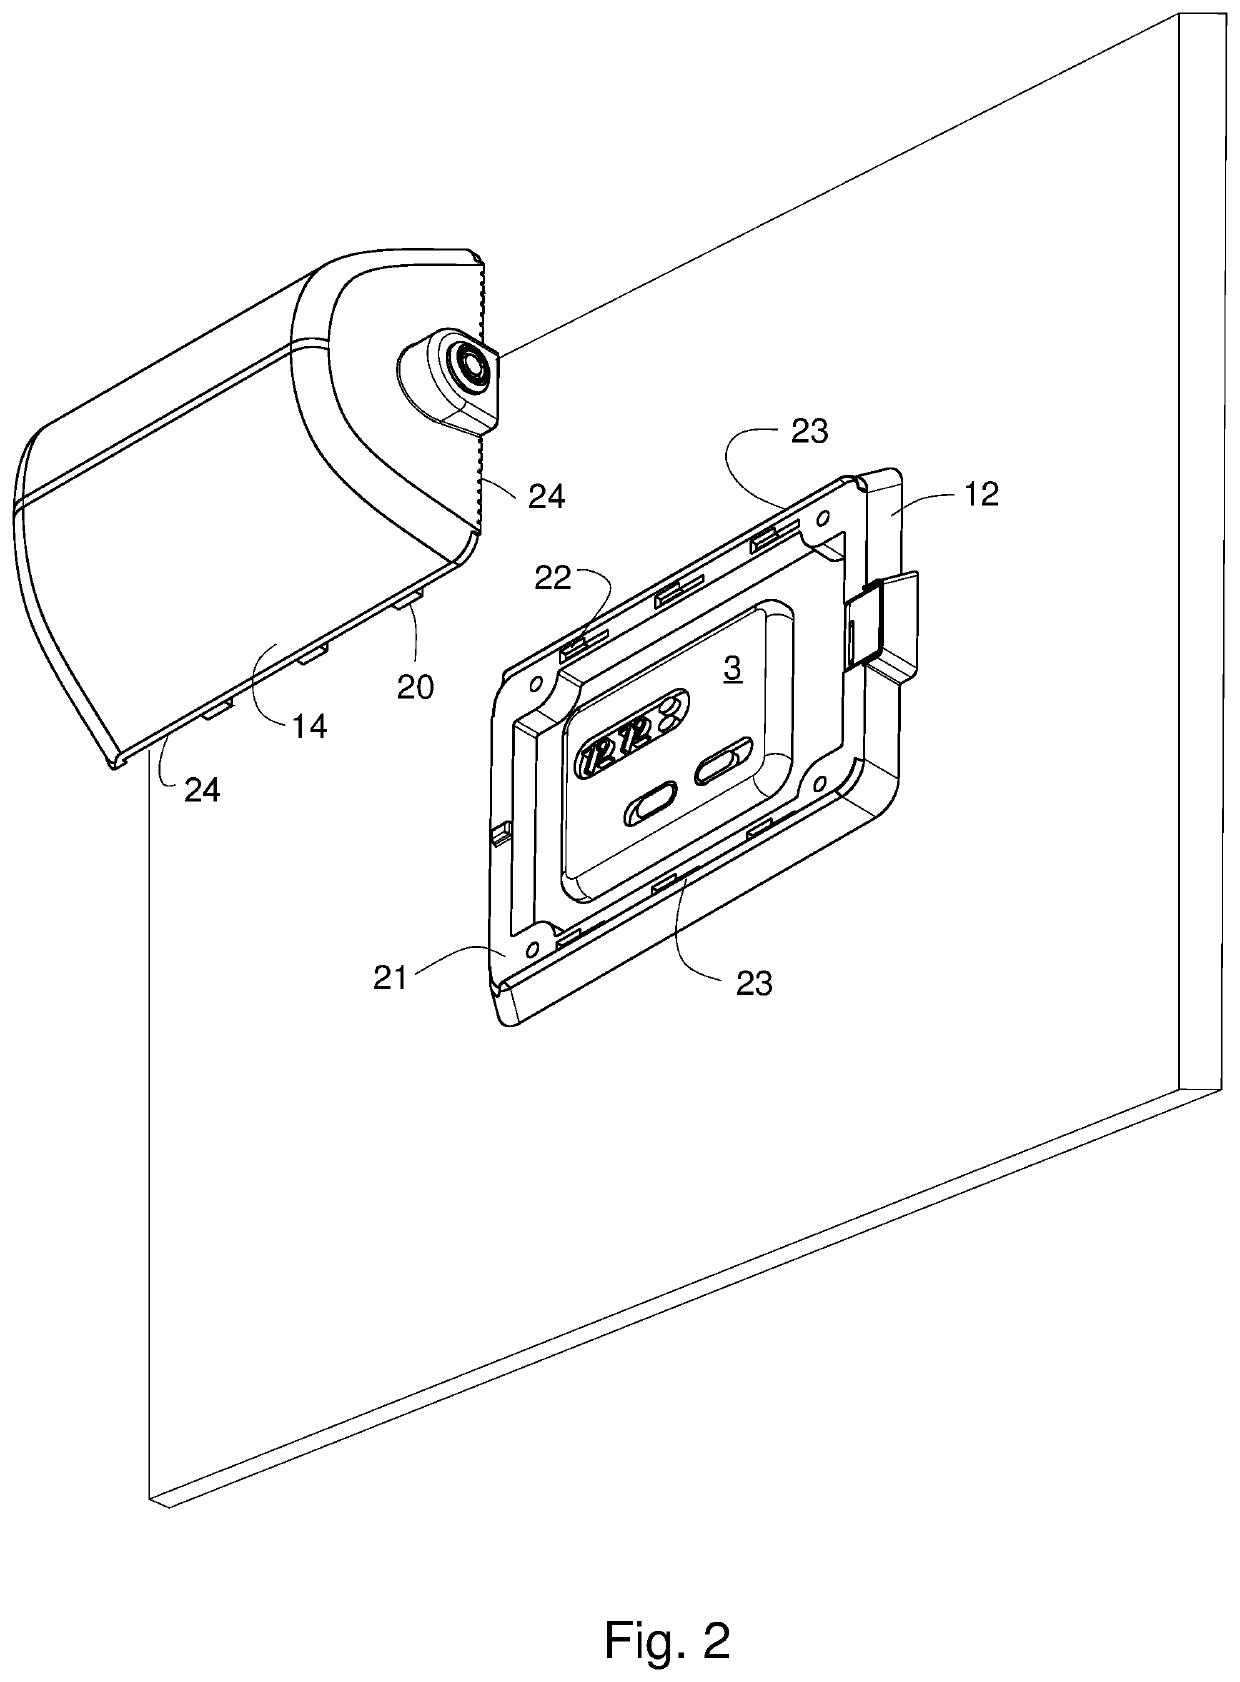 Ligature-resistant cover for securing wall-mounted devices